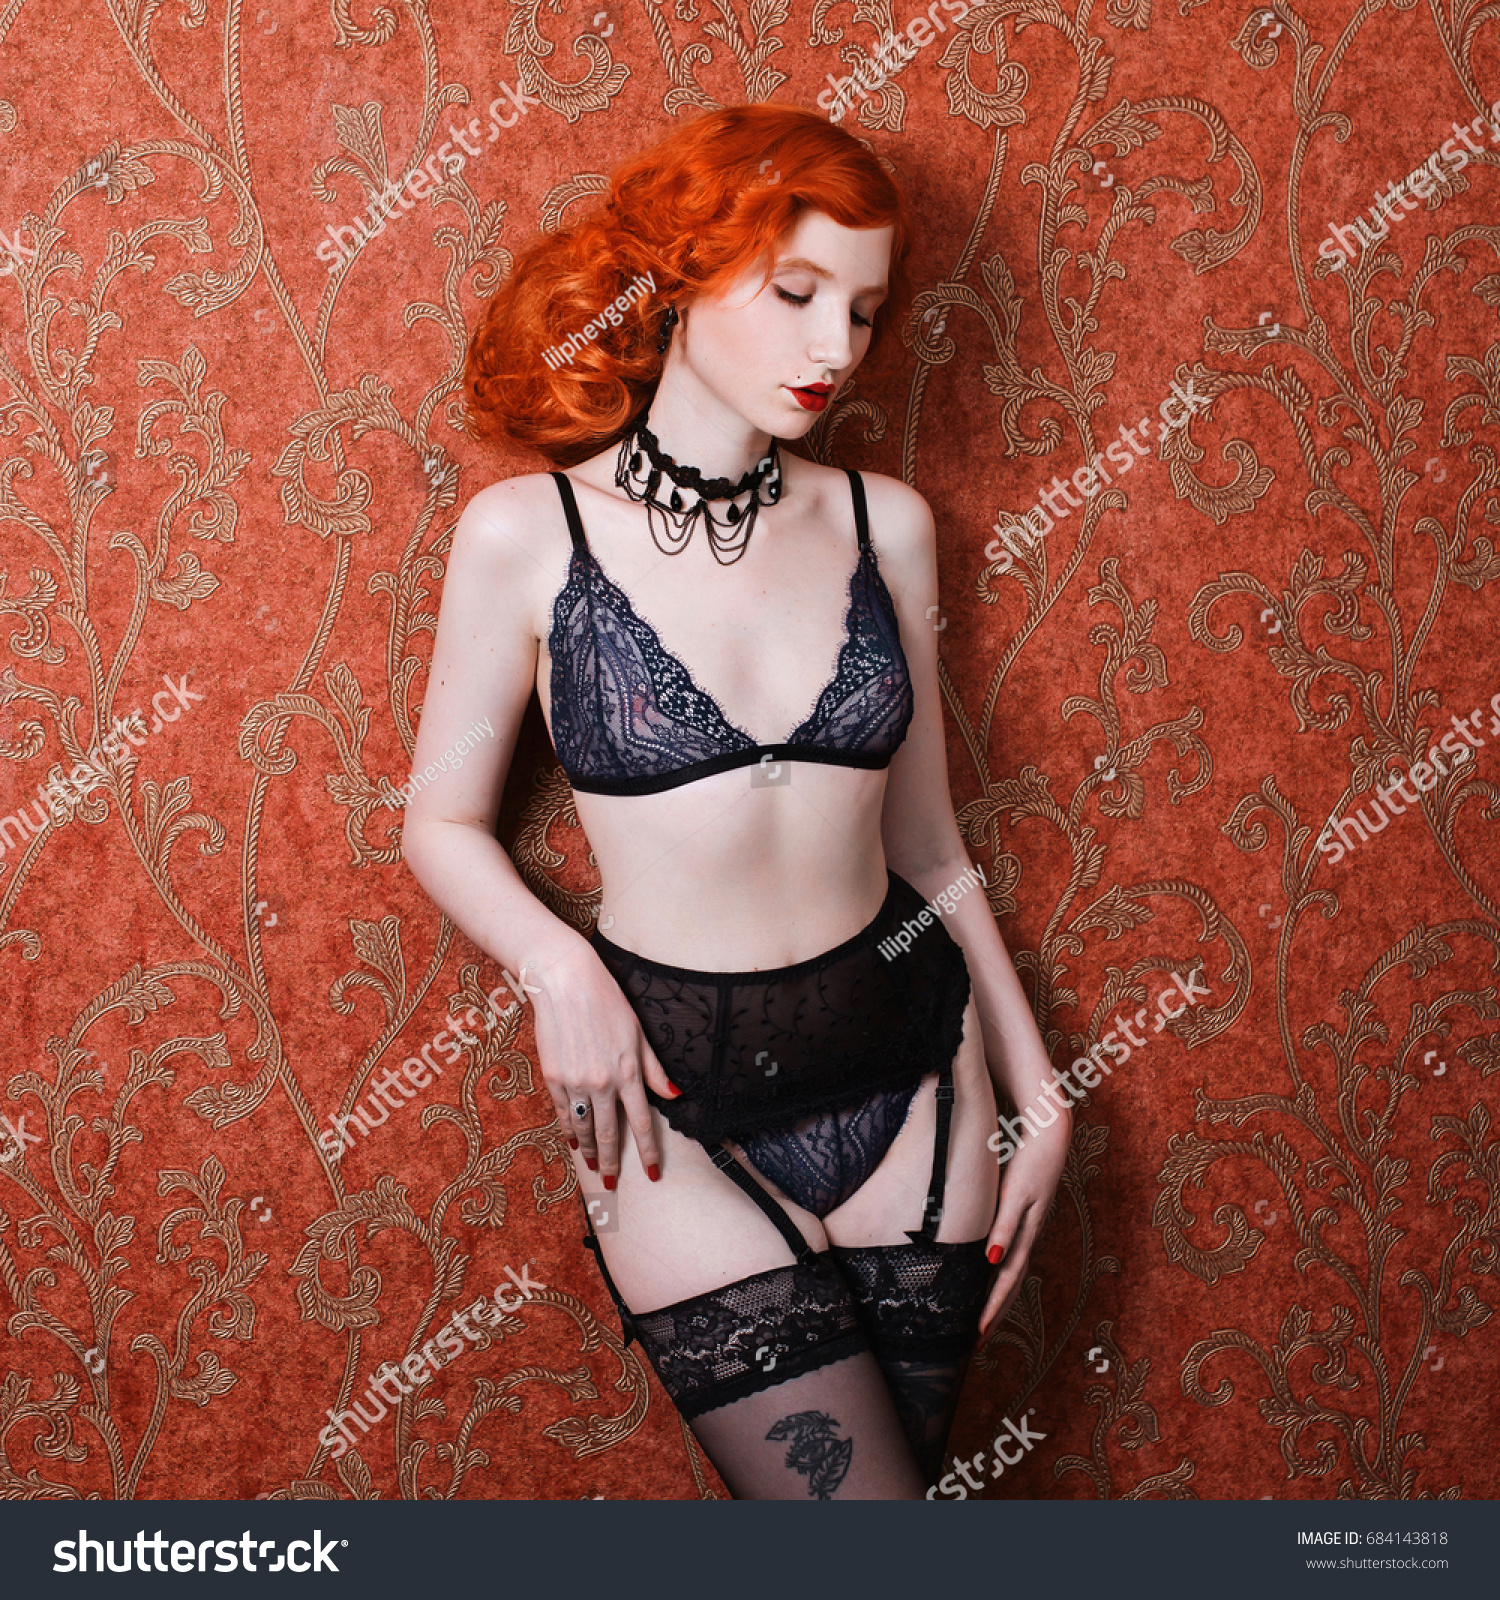 Hot Pale Redheads